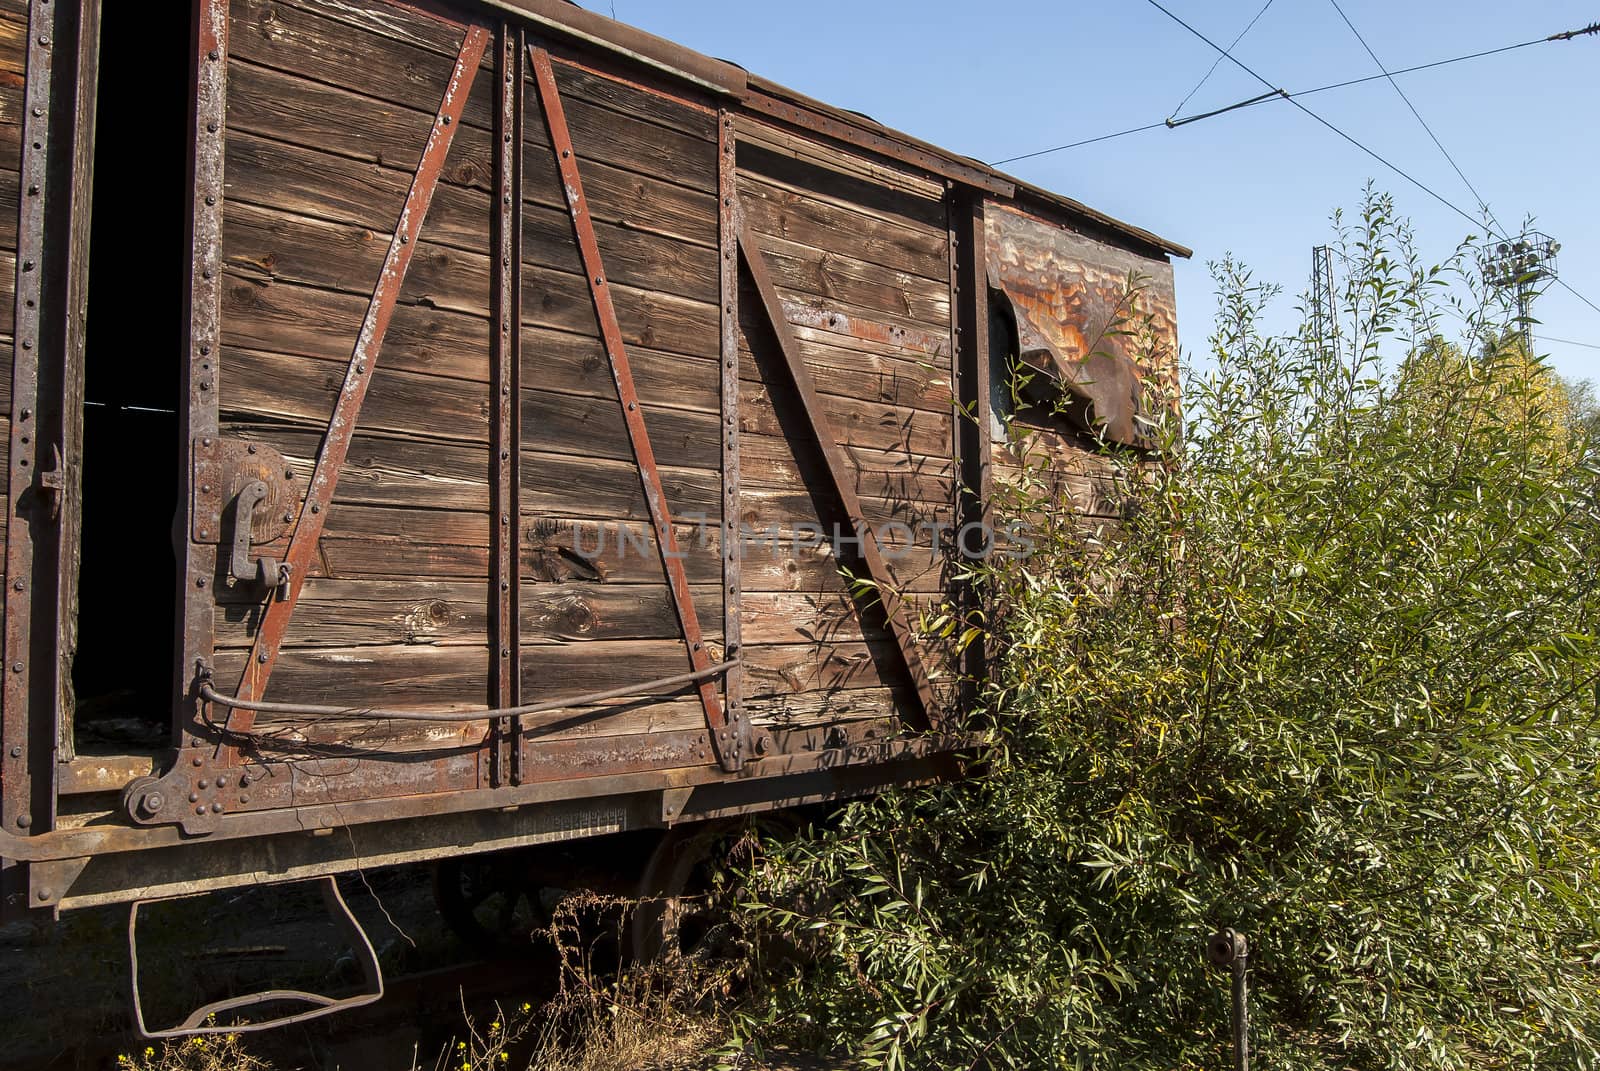 Old freight abandoned wooden railway wagon and bush